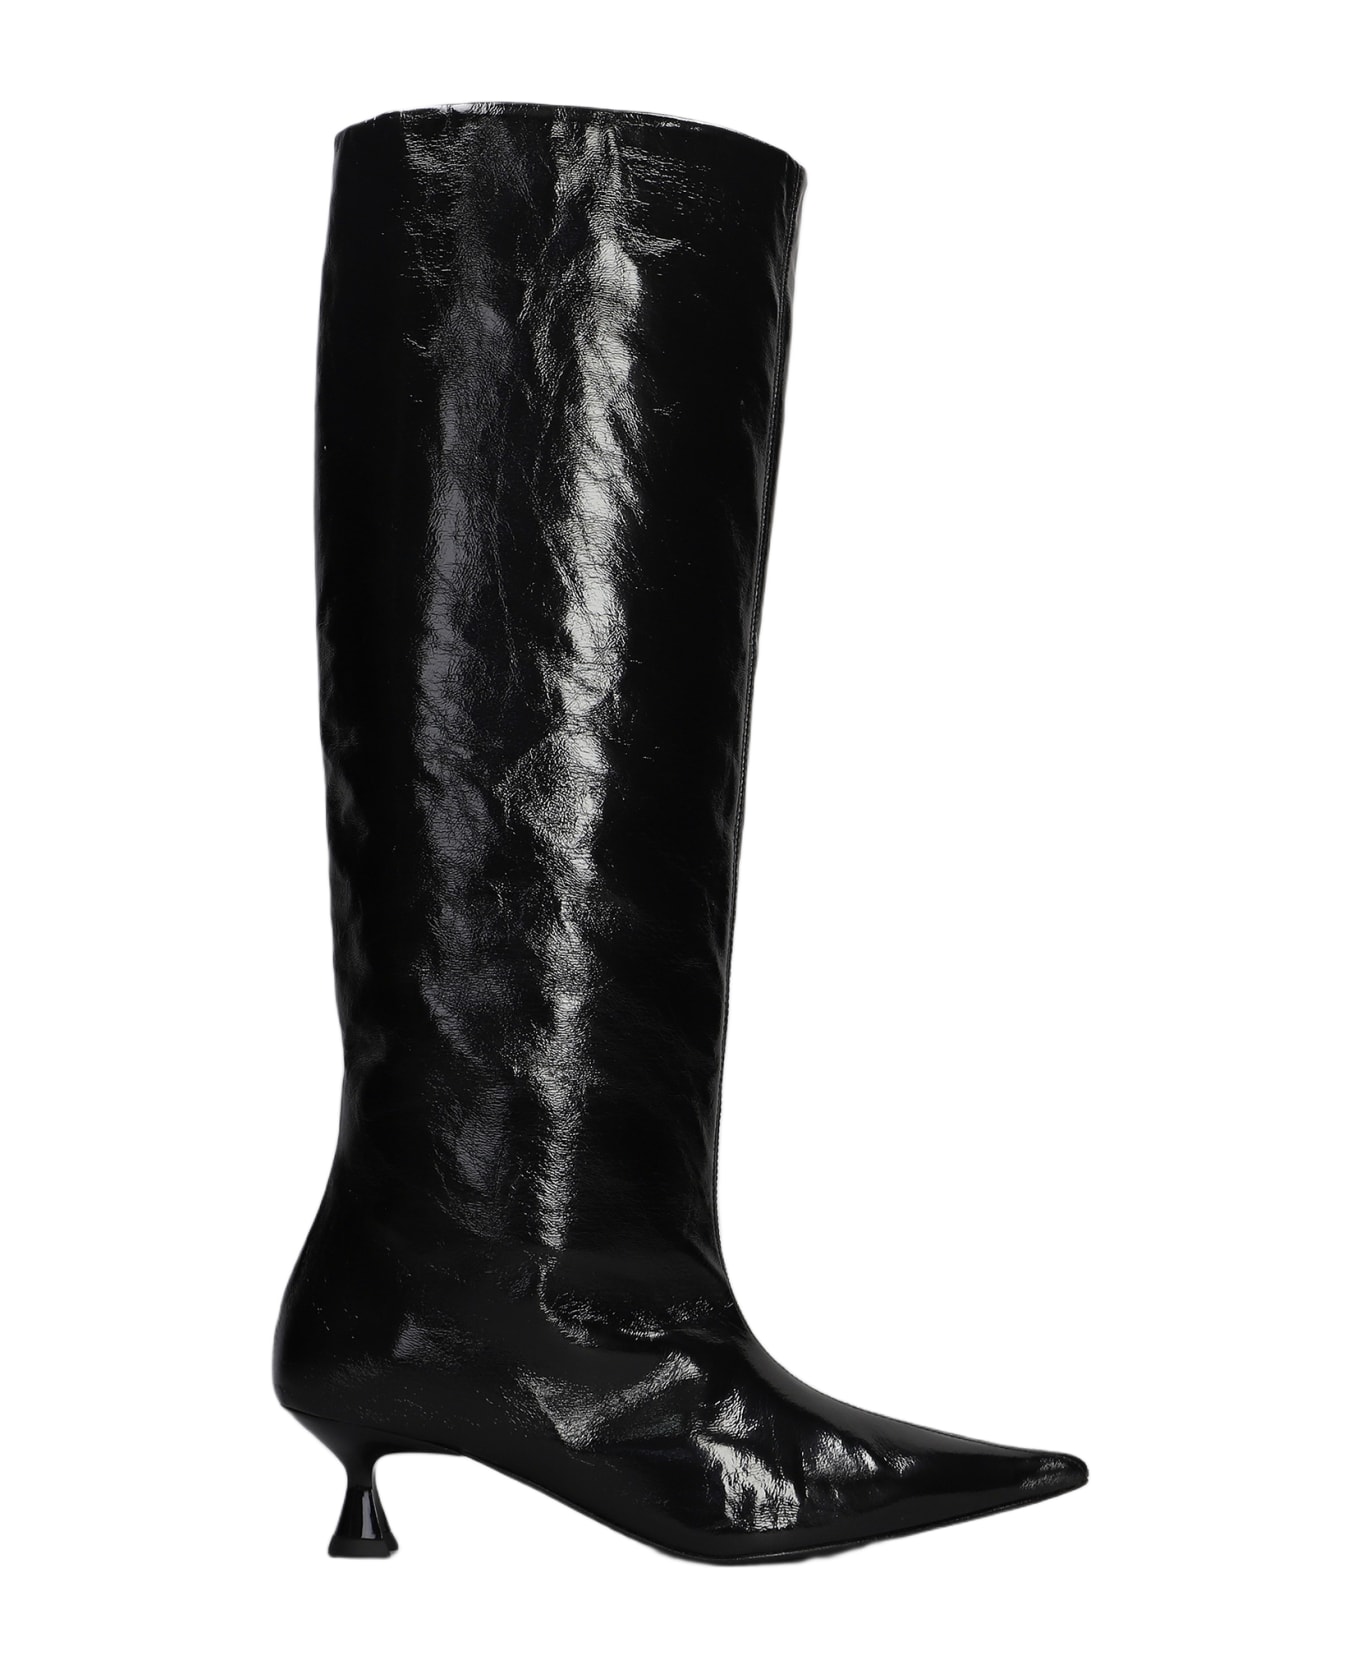 Ganni Low Heels Boots In Black Polyester - black ブーツ